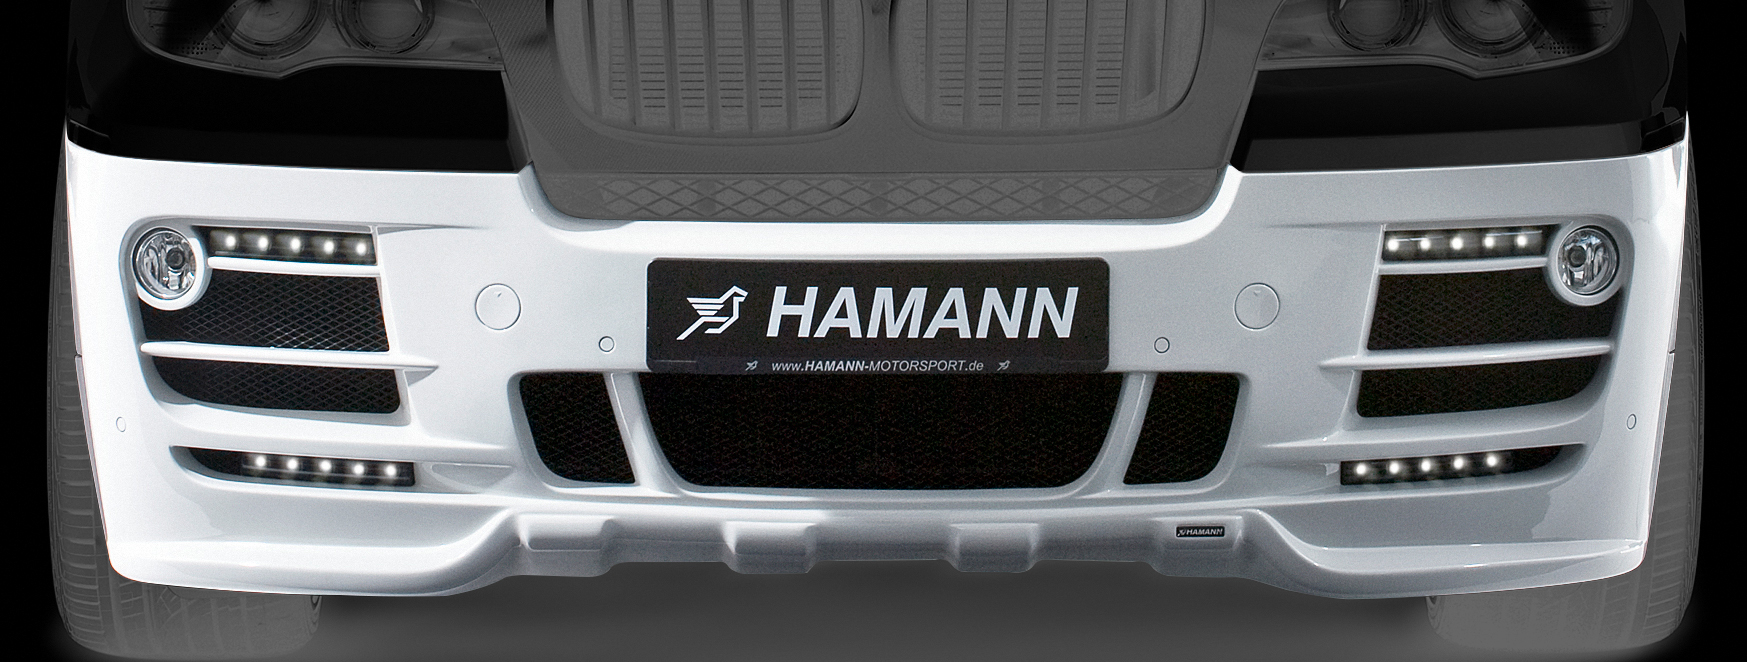 Tuning Parts for Hamann Style Front Bumper Body Kit for Bnw X5 E70